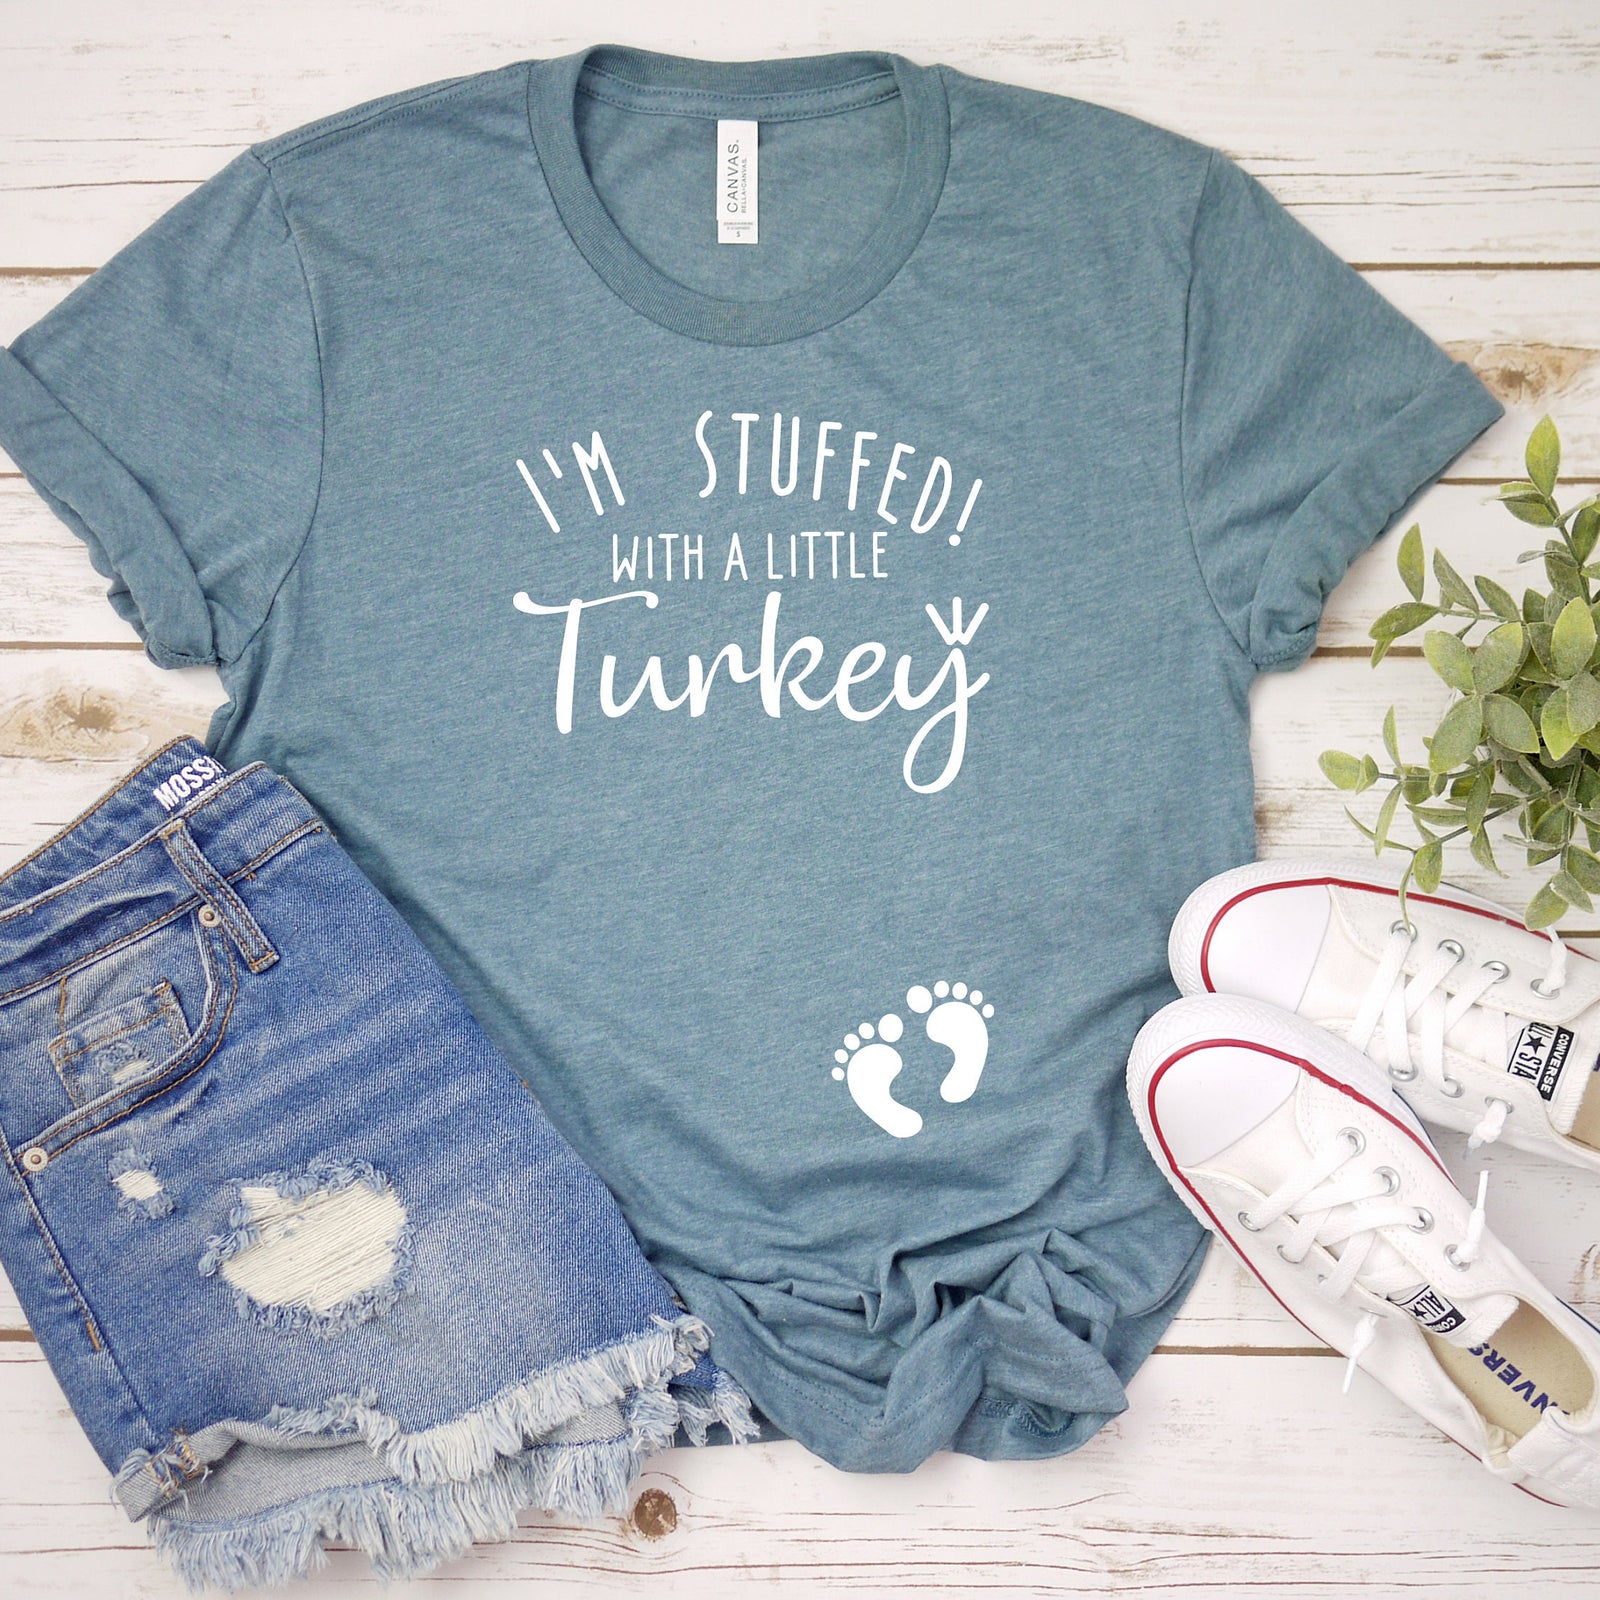 I'm stuffed with a Little Turkey - Pregnancy Announcement T Shirt - Funny Thanksgiving T for Mom - Having a Baby